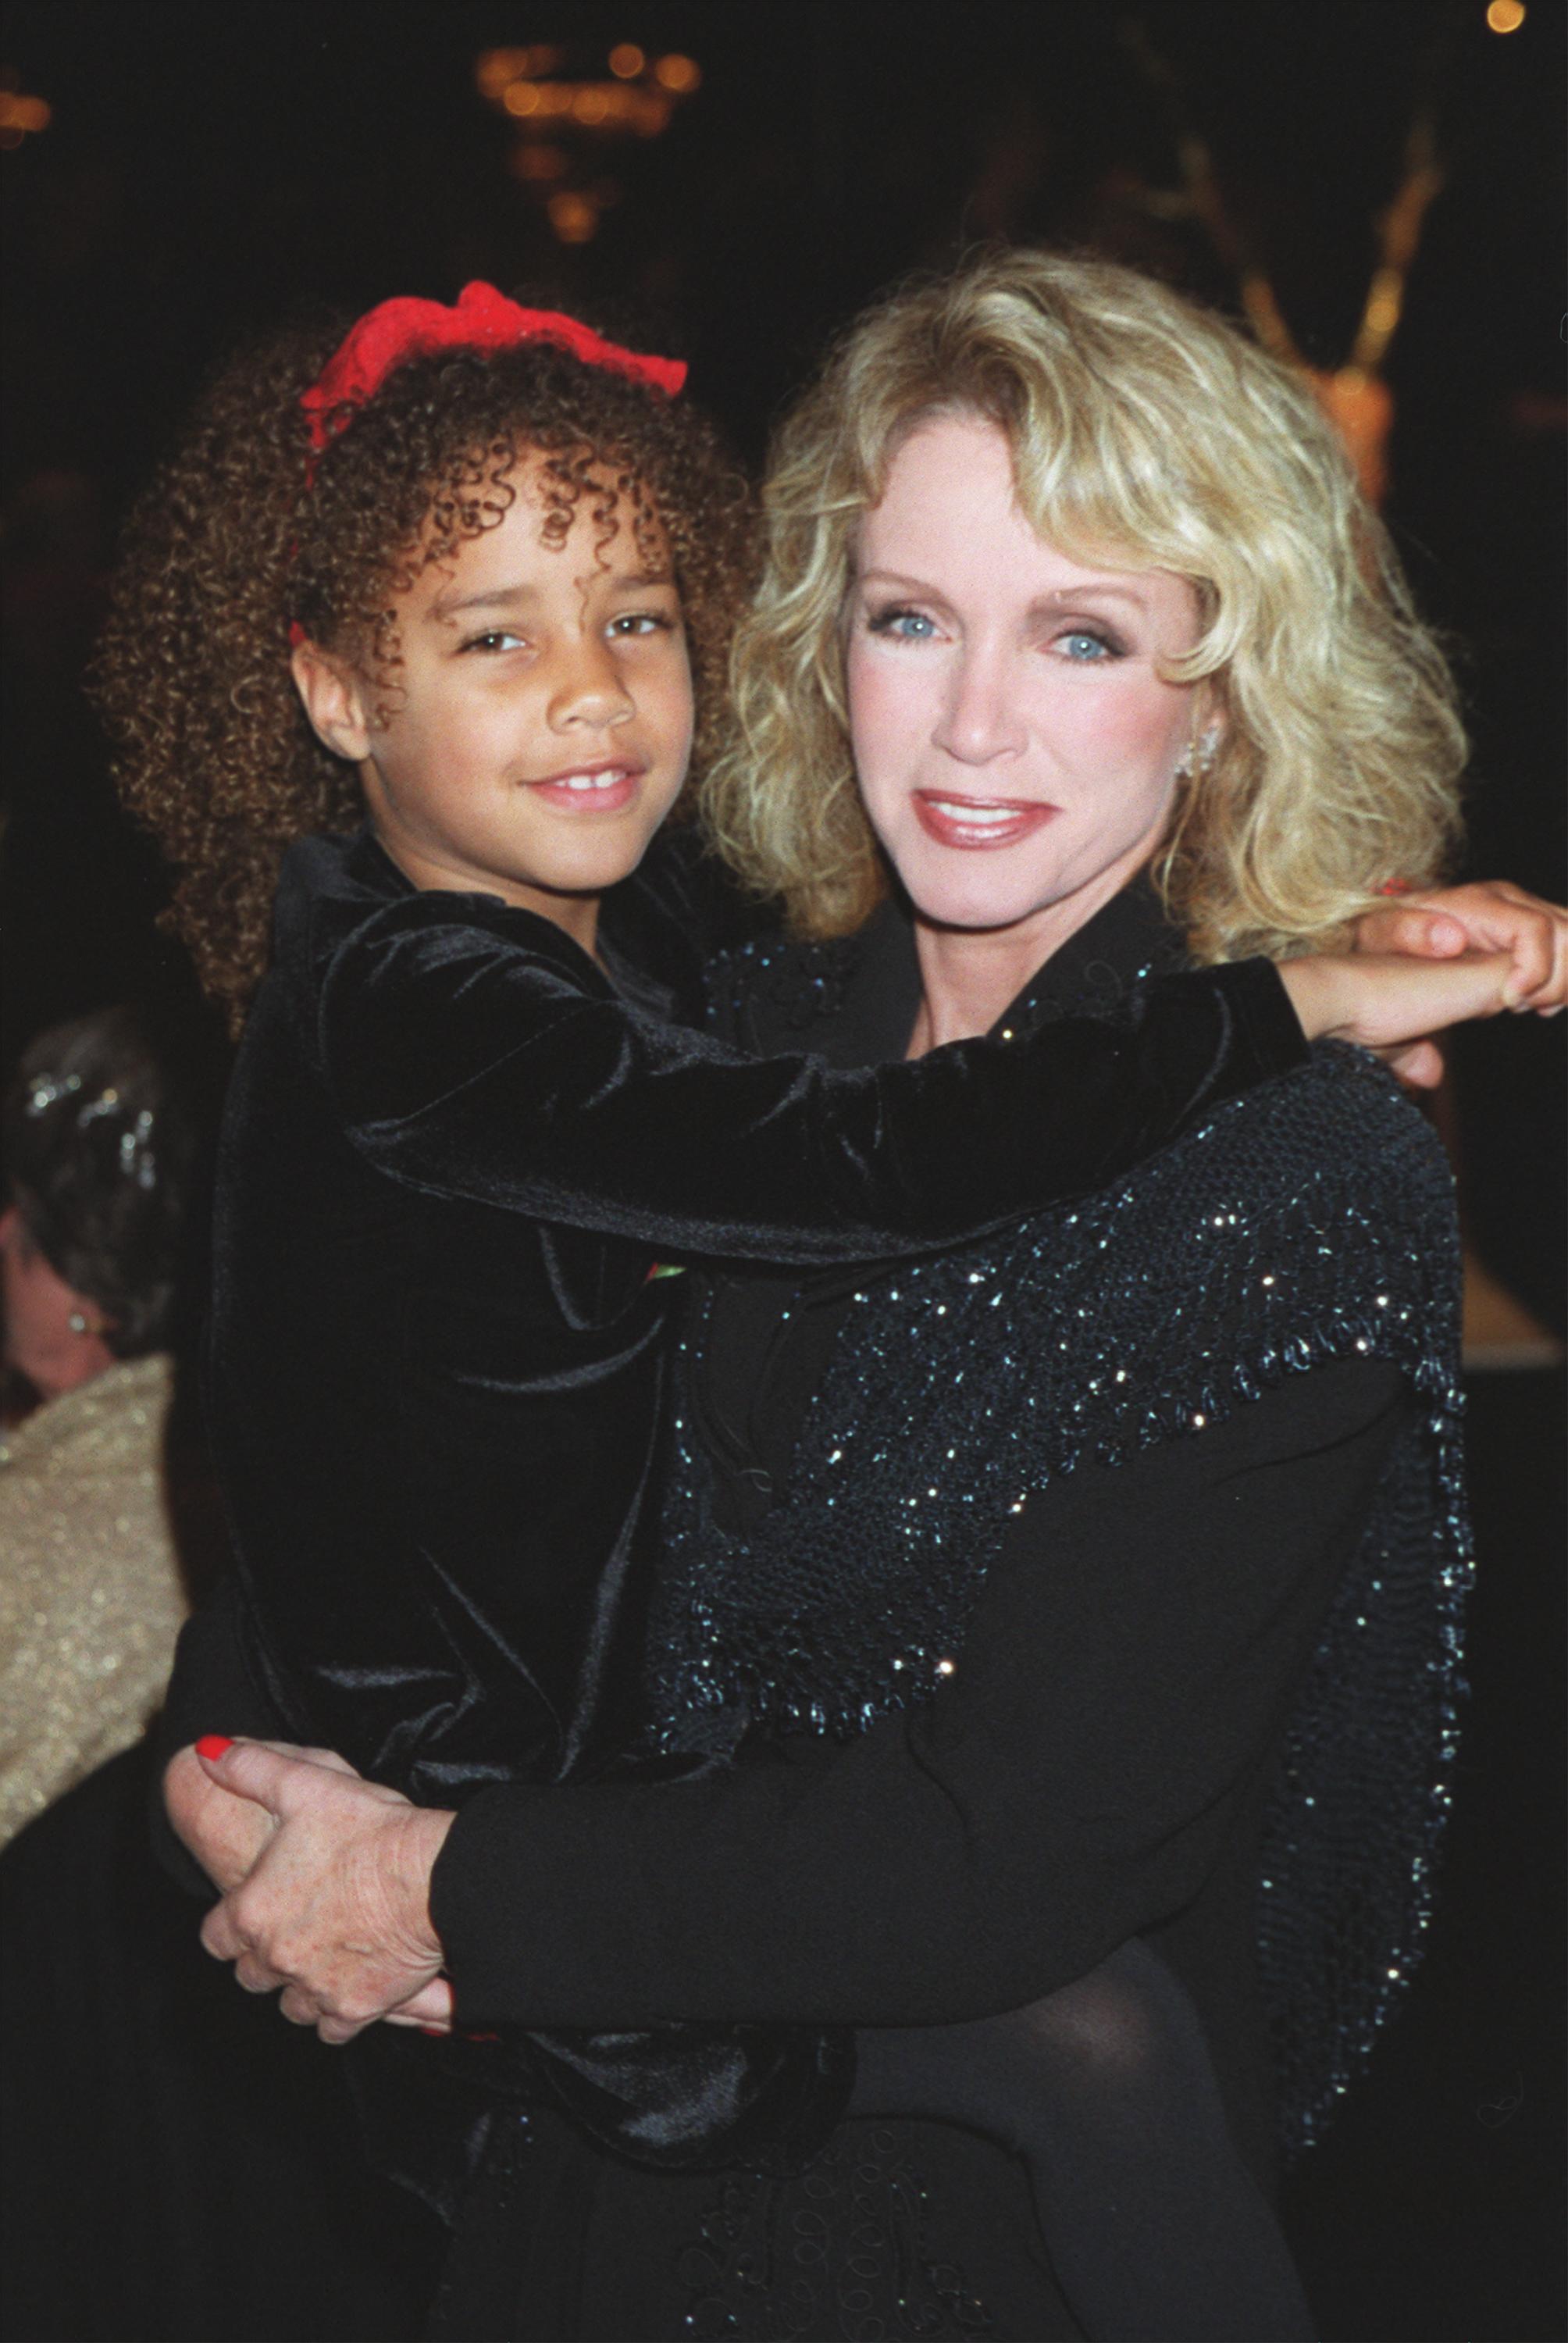 Actress Donna Mills and adopted daughter Chloe pose for a picture during "Merv Griffins 7th Annual Christmas Tree Lane Lighting Ceremony and Live Auction of Trees" December 12, 2000 in Beverly Hills, California | Source: Getty Images